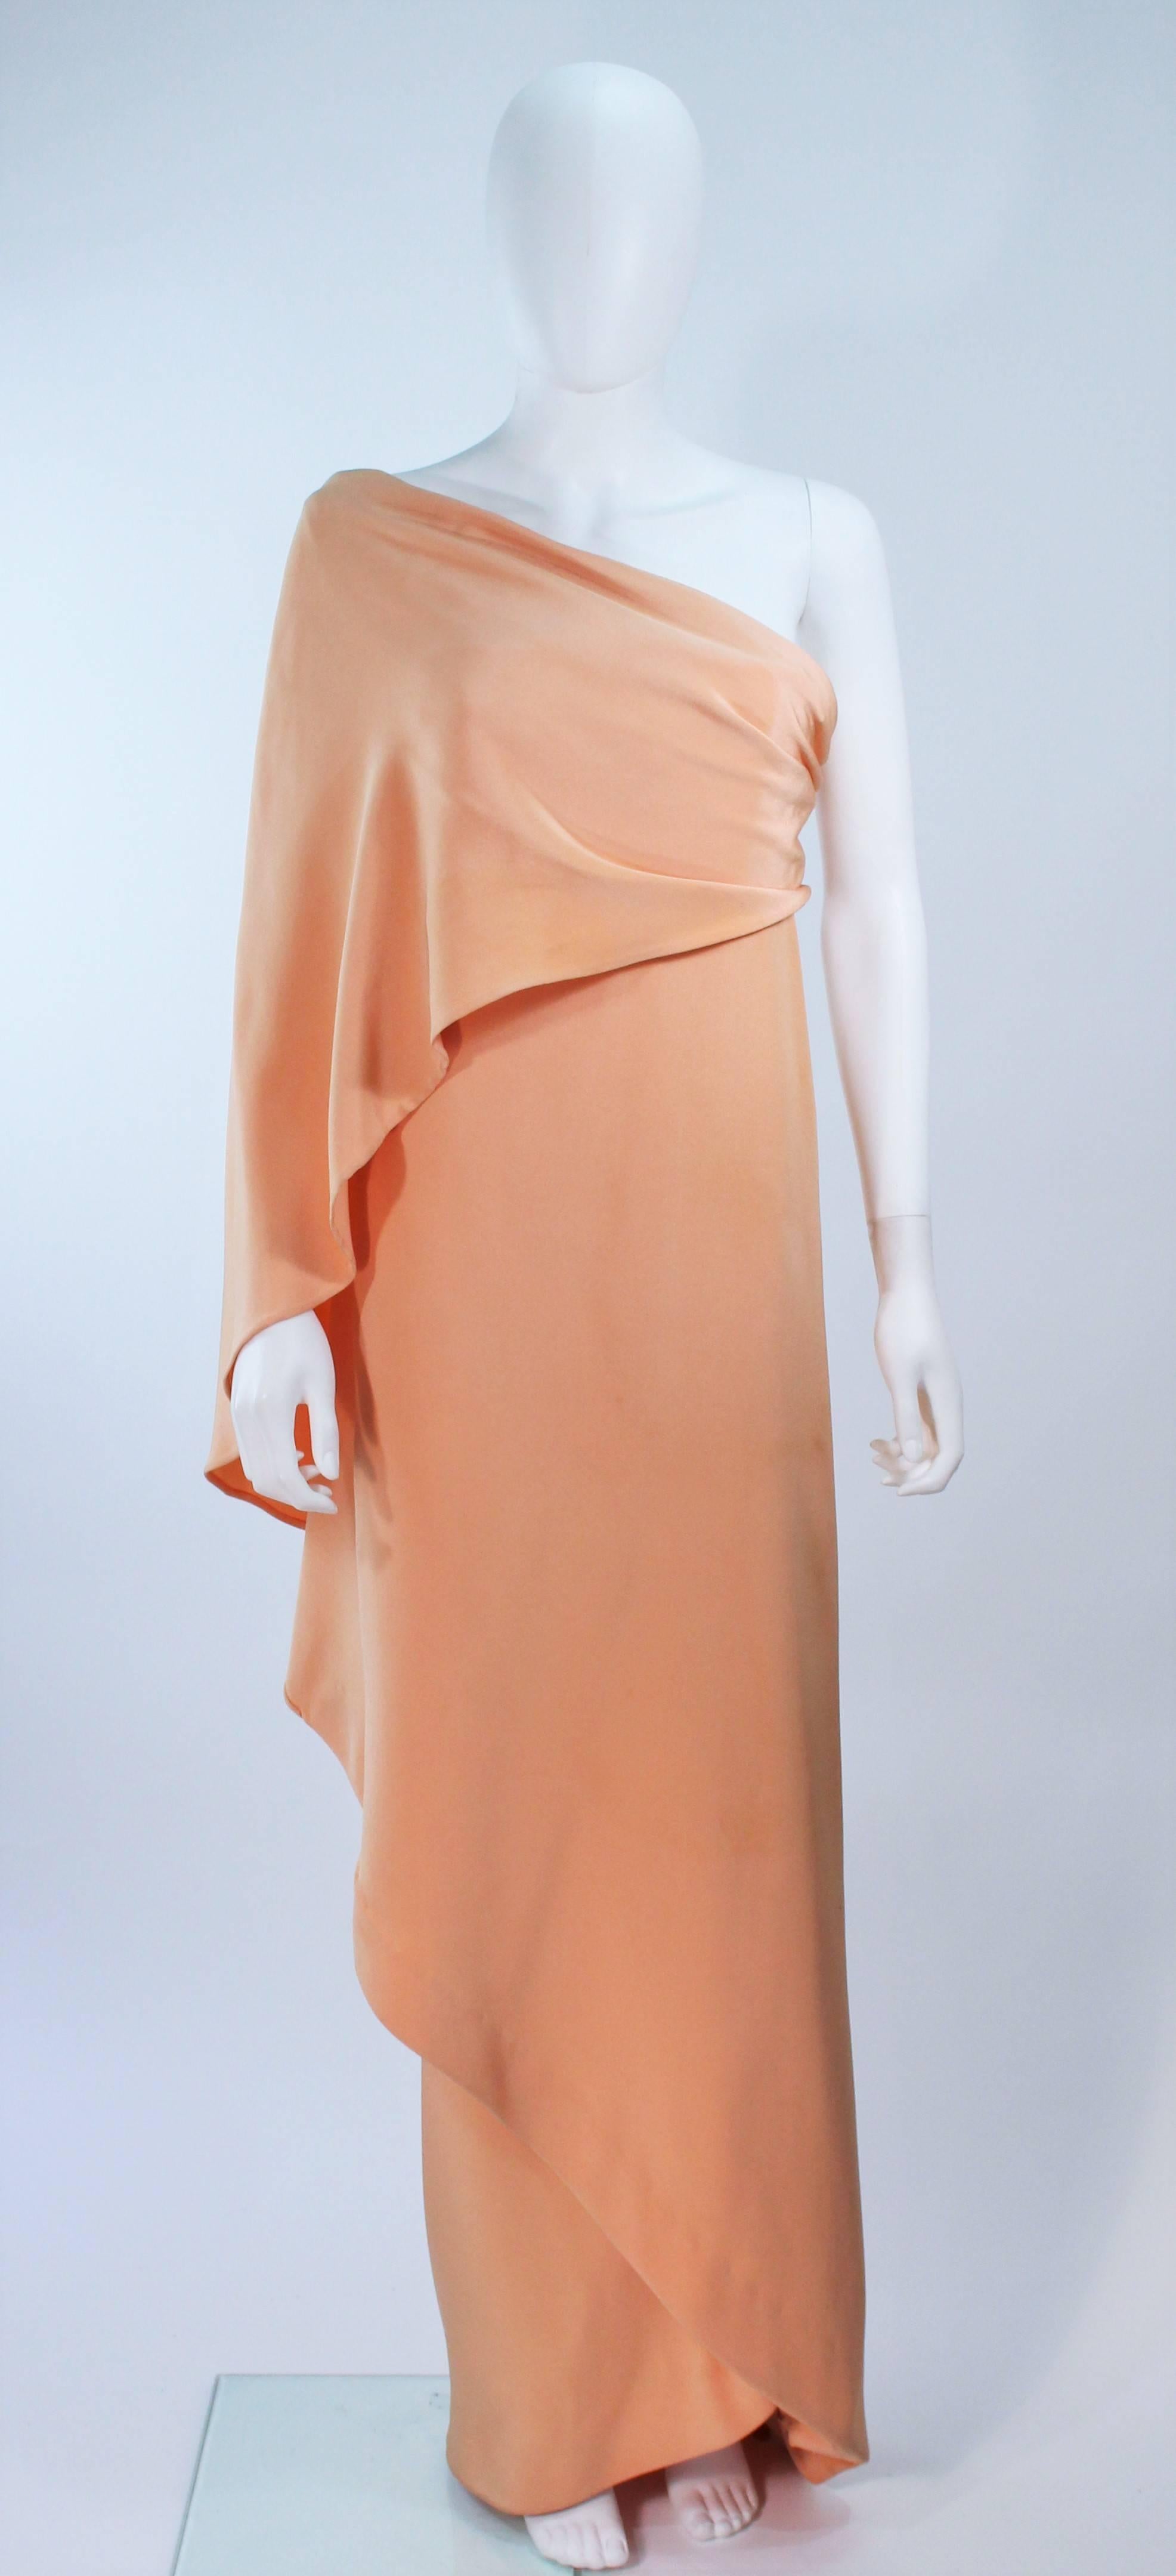 This is a vintage long peach silk gown by Givenchy, from the 1970's. The gown has a constructed bodice and a draped sleeve over the shoulder. There is some discoloration due to age. Features interior boned bustier 

Provenance: Betsy